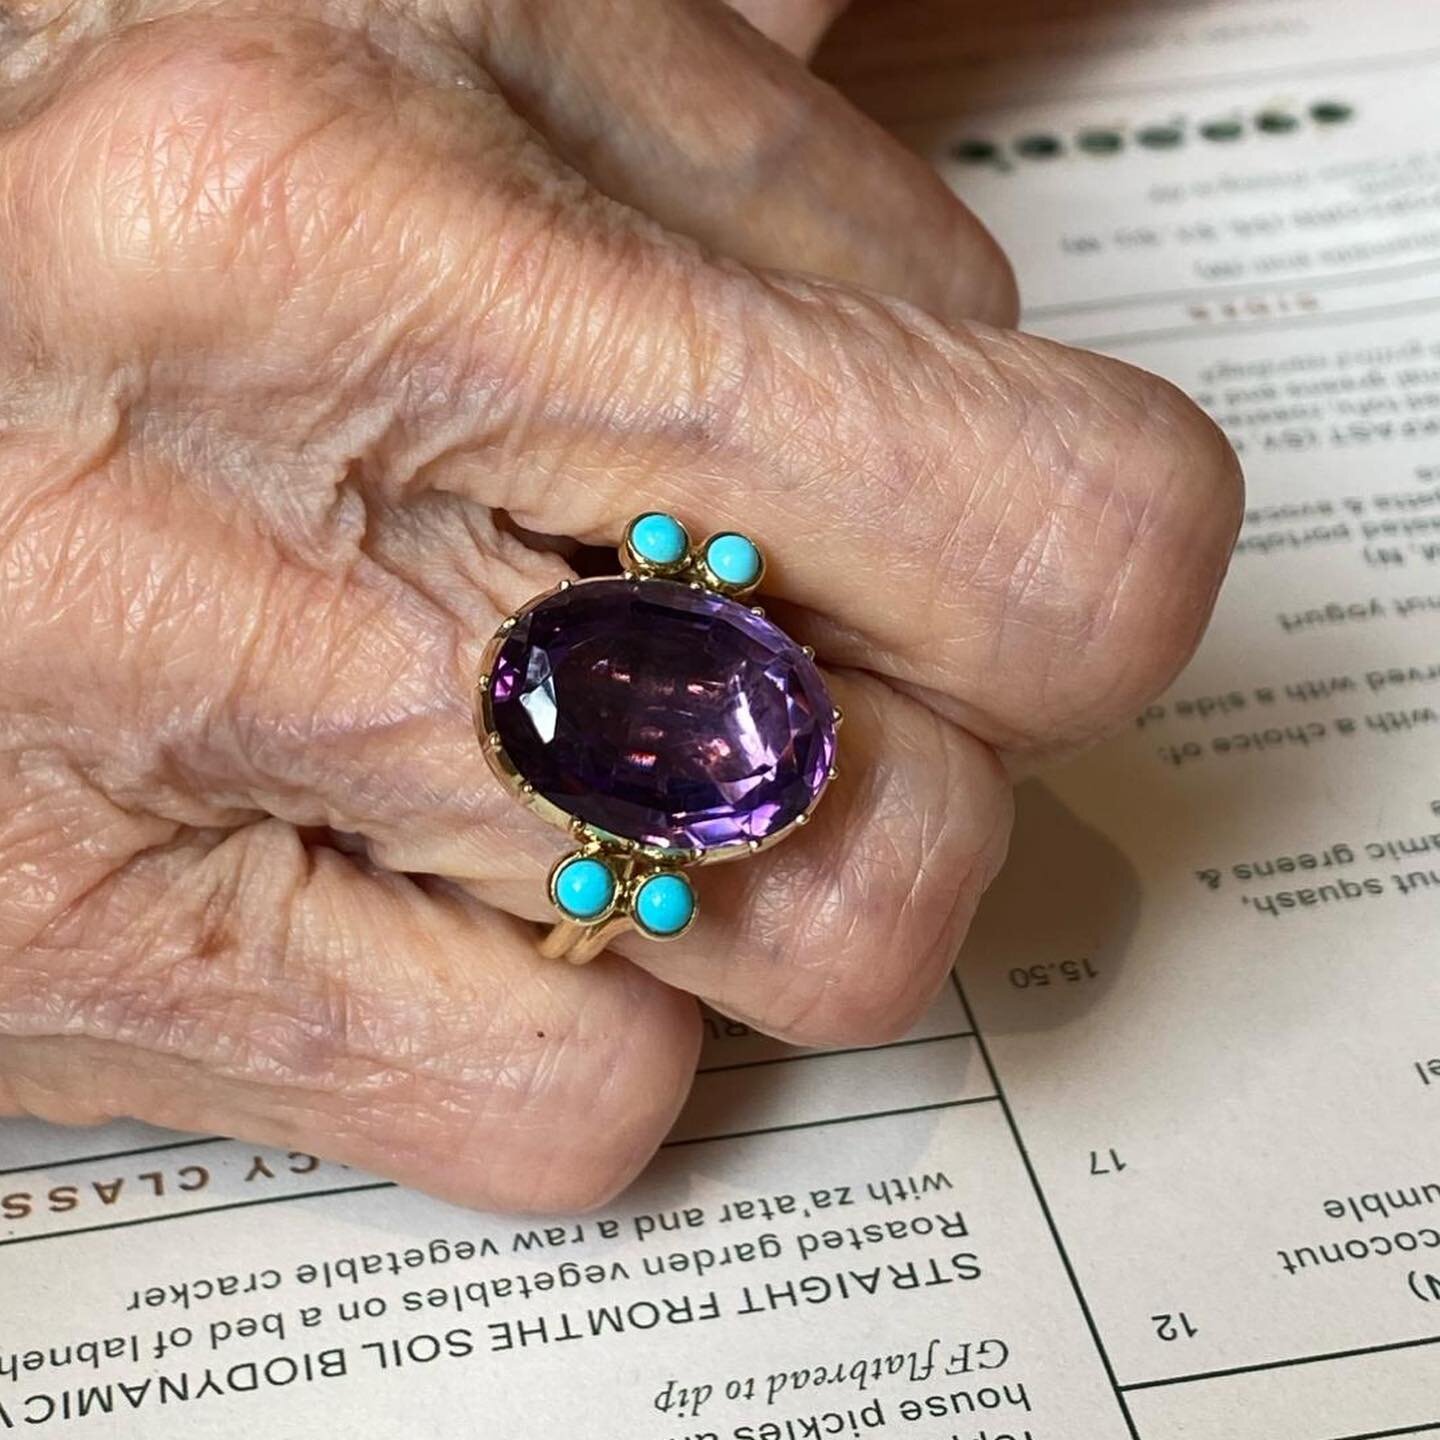 Family heirloom amethyst
One turquoise for each of Mollie&rsquo;s children
And the ring on the lady herself 

Thank you x

#sofiannijewellery #heirloomjewellery #bespokejewelrydesign #sofiannishowroom